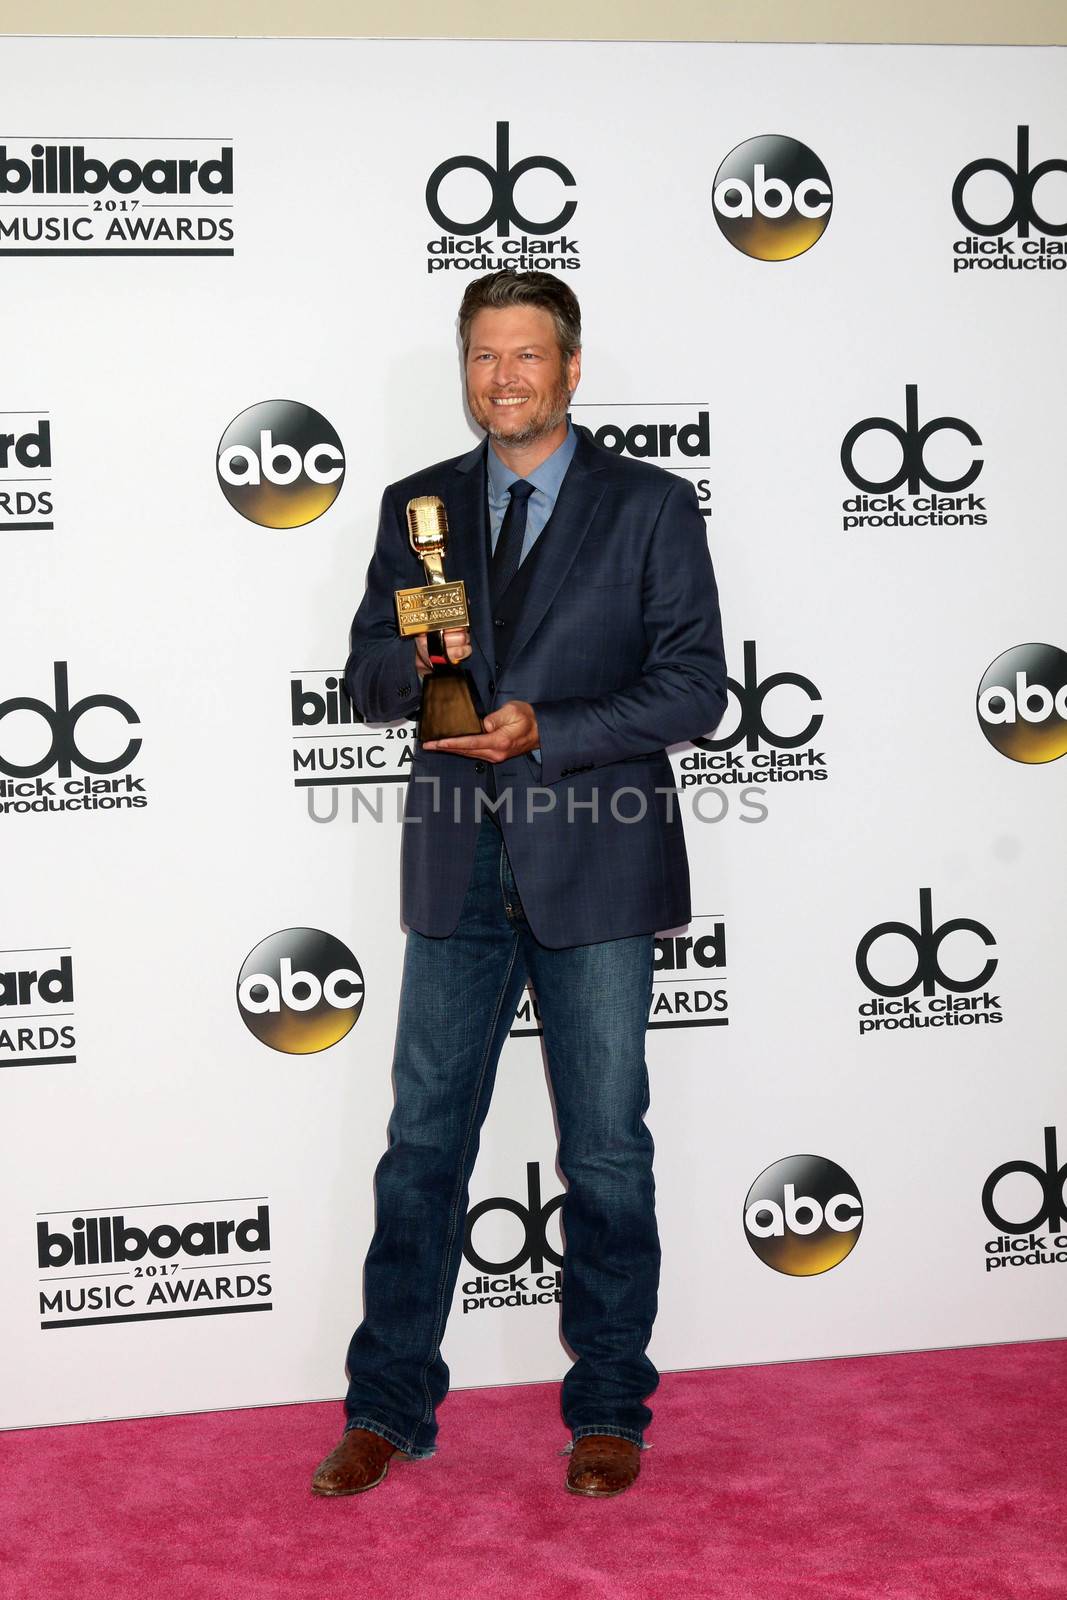 Blake Shelton
at the 2017 Billboard Awards Press Room, T-Mobile Arena, Las Vegas, NV 05-21-17/ImageCollect by ImageCollect